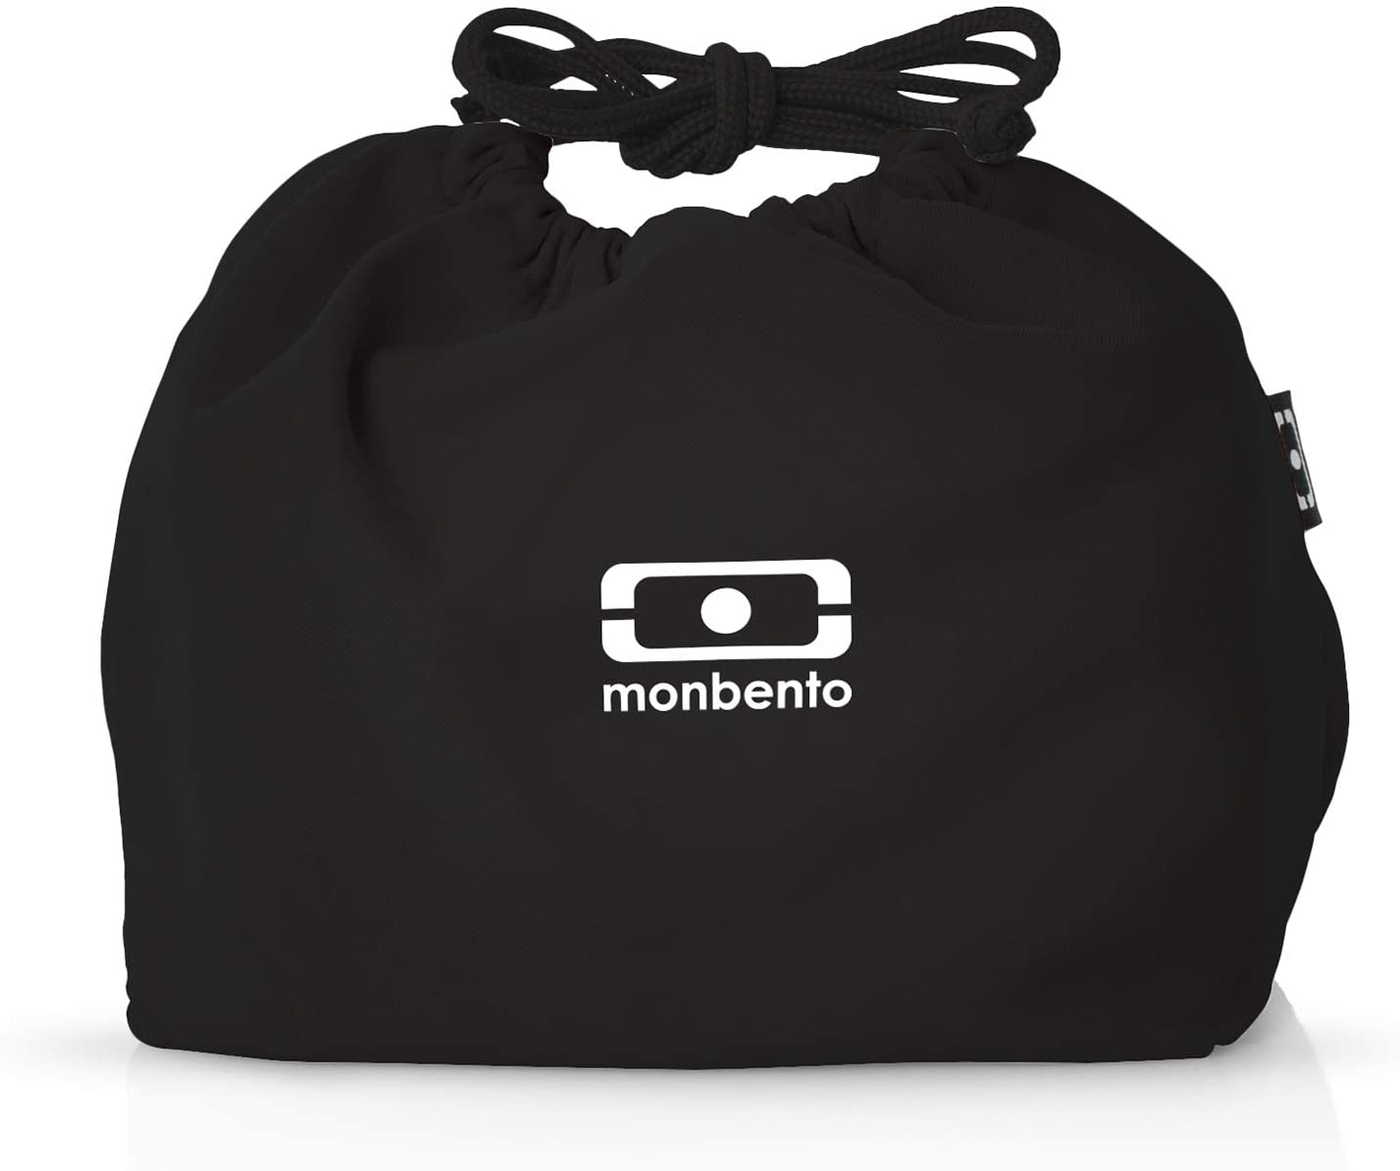 monbento - MB Pochette M black Onyx Bento lunch bag - Polyester lunch tote - Suitable for MB Original MB Square & MB Tresor Bento boxes